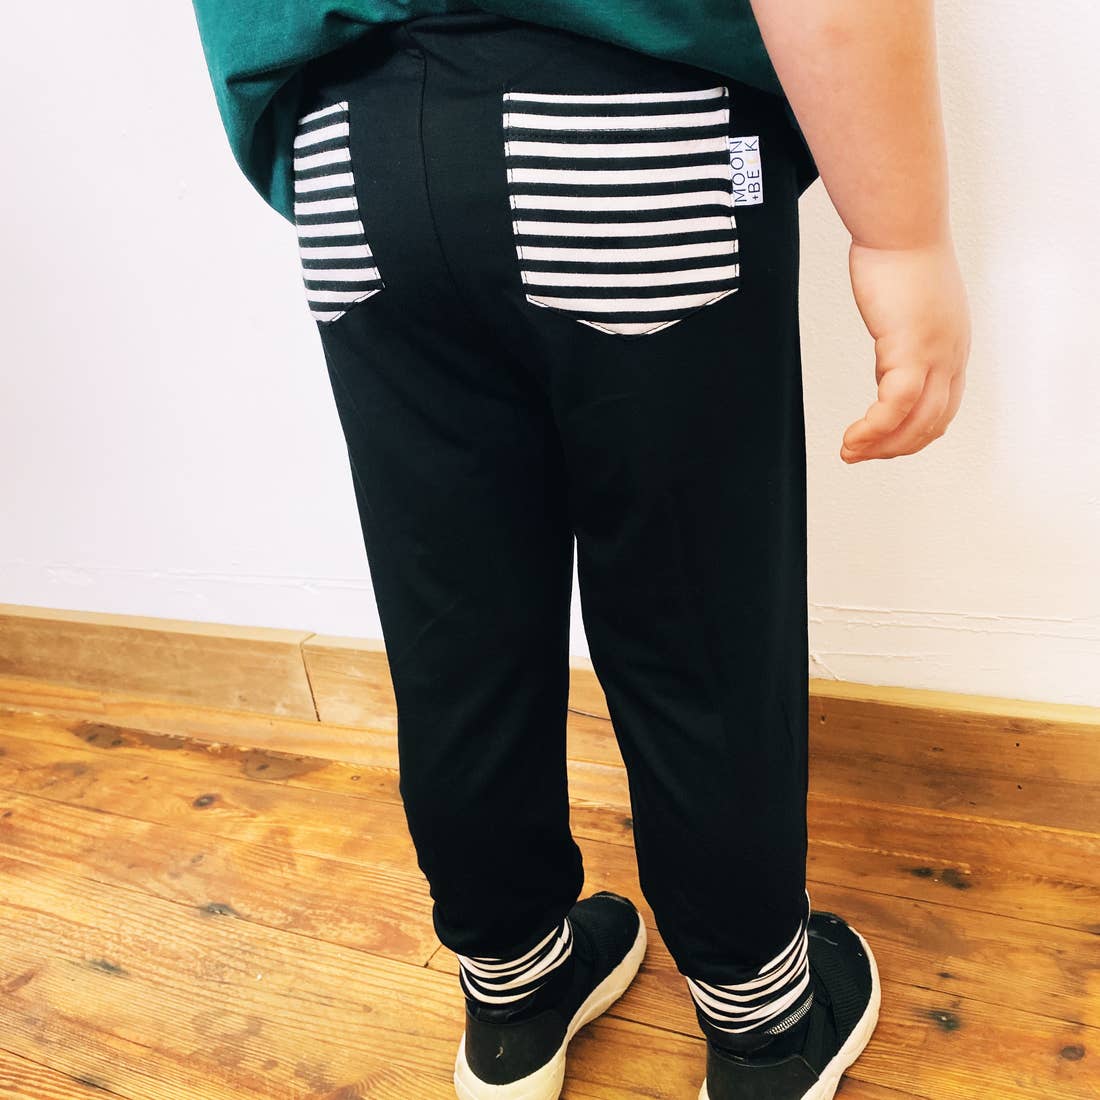 Bamboo Pocket Leggings by Moon and Beck